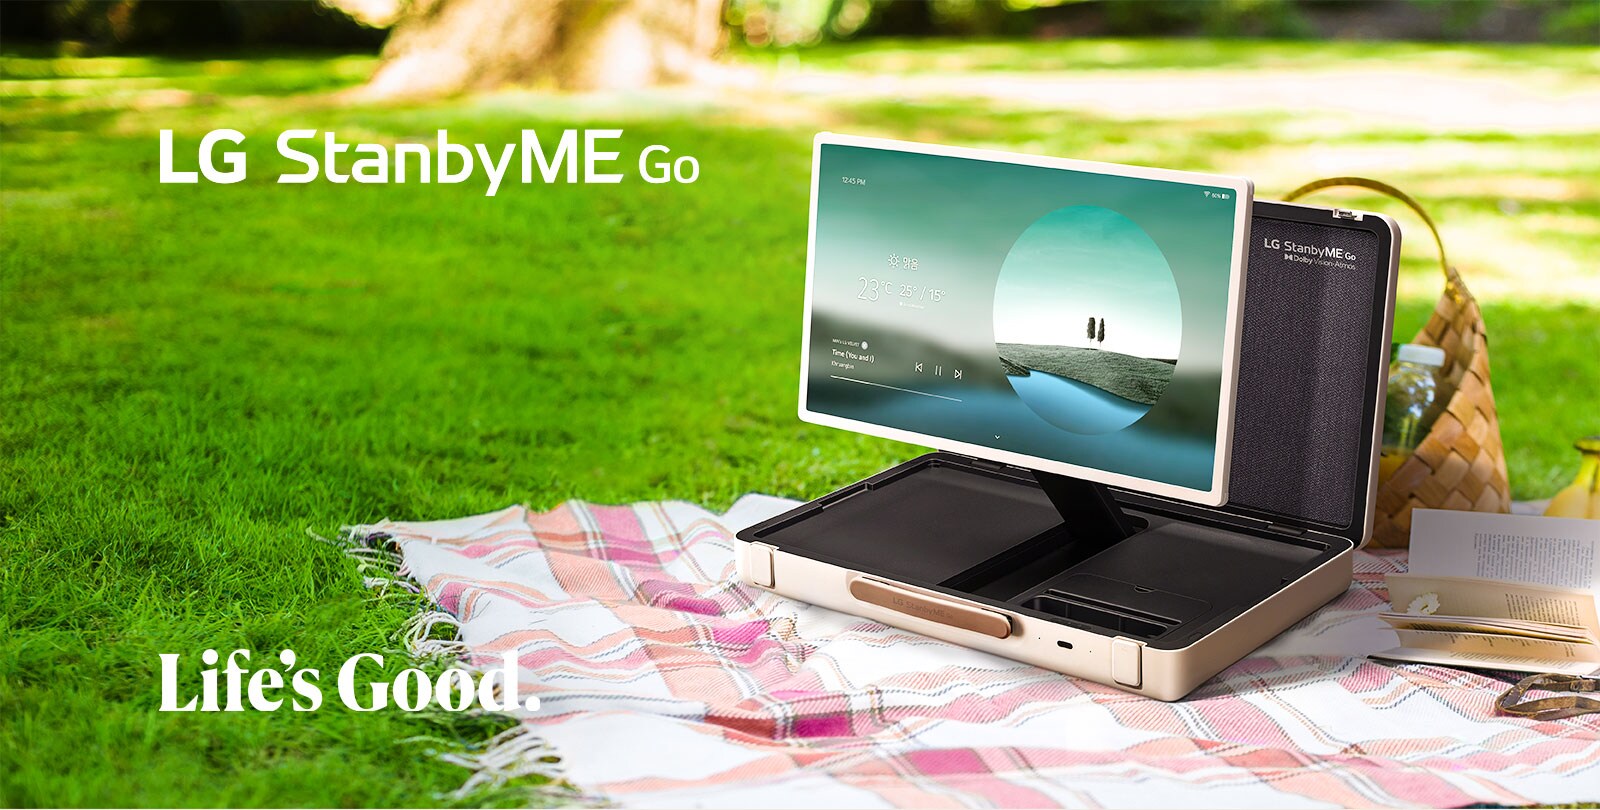 LG StanbyME Go is placed on a checkered picnic blanket with left side forward, displaying a weather themed home screen.